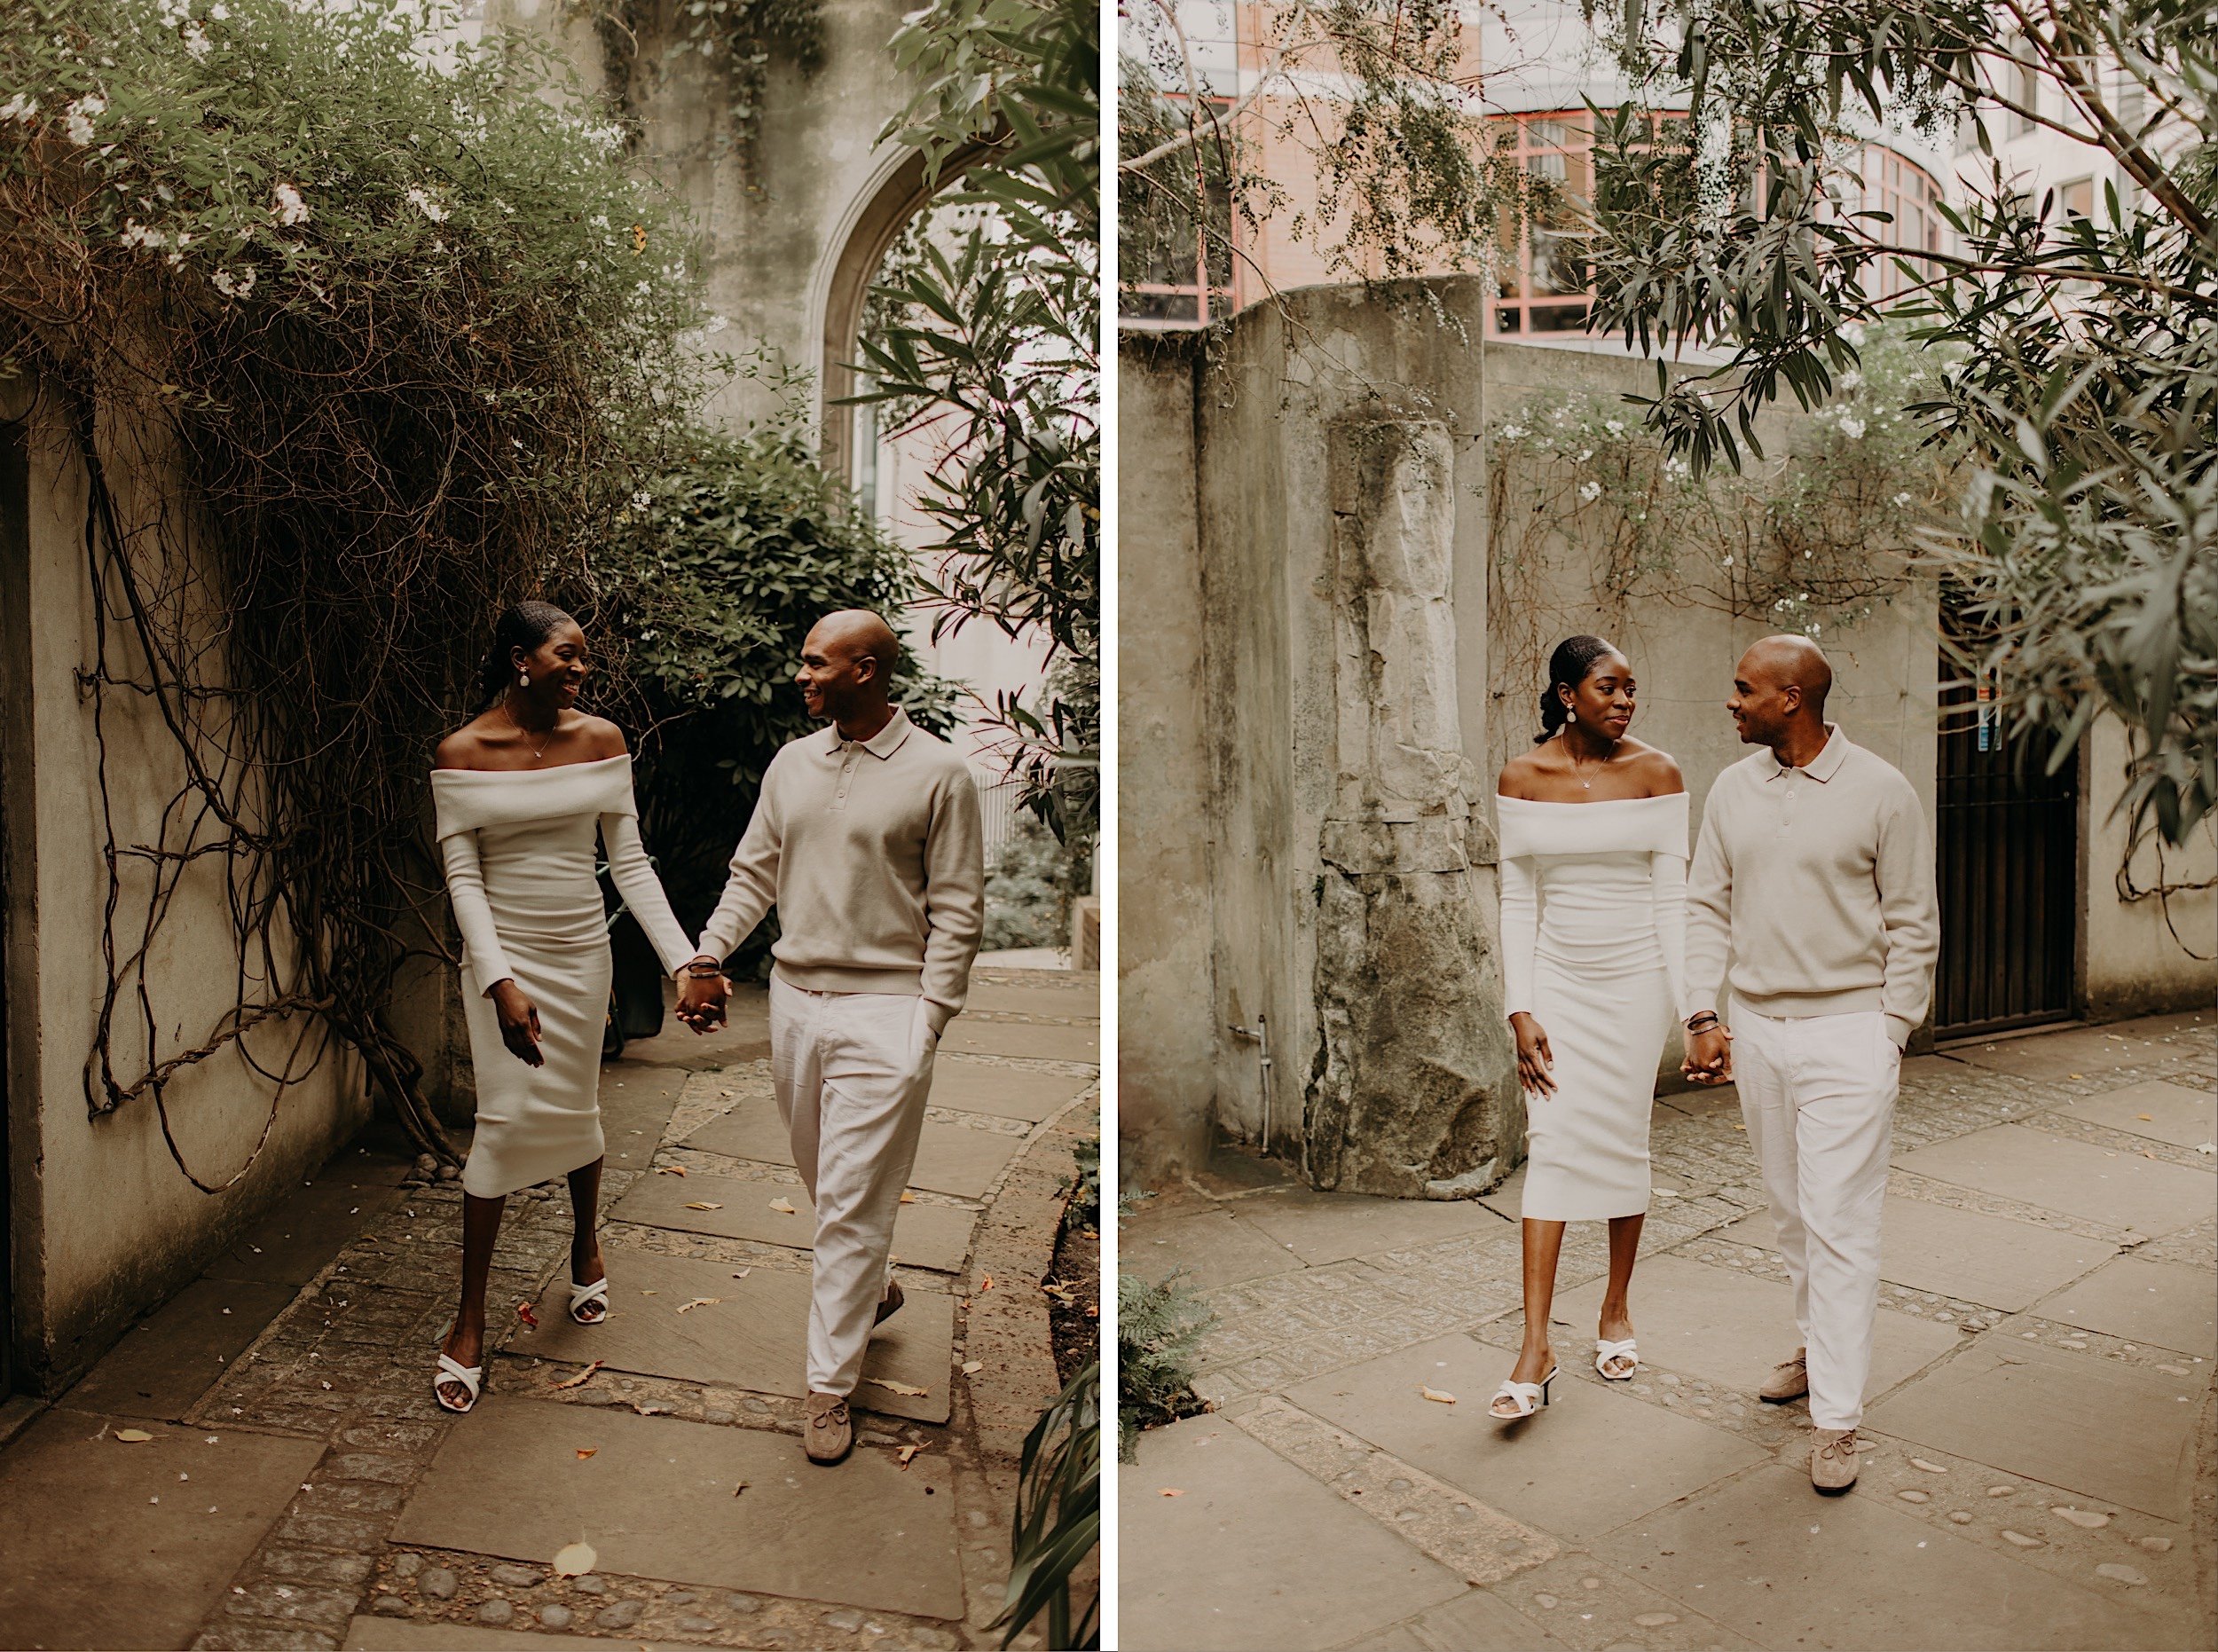 02_St-Dunstans-in-the-east-pre-wedding-shoot0005_St-Dunstans-in-the-east-pre-wedding-shoot0003_Gorgeous black model couple in love walk through st dunstan in the east.jpg